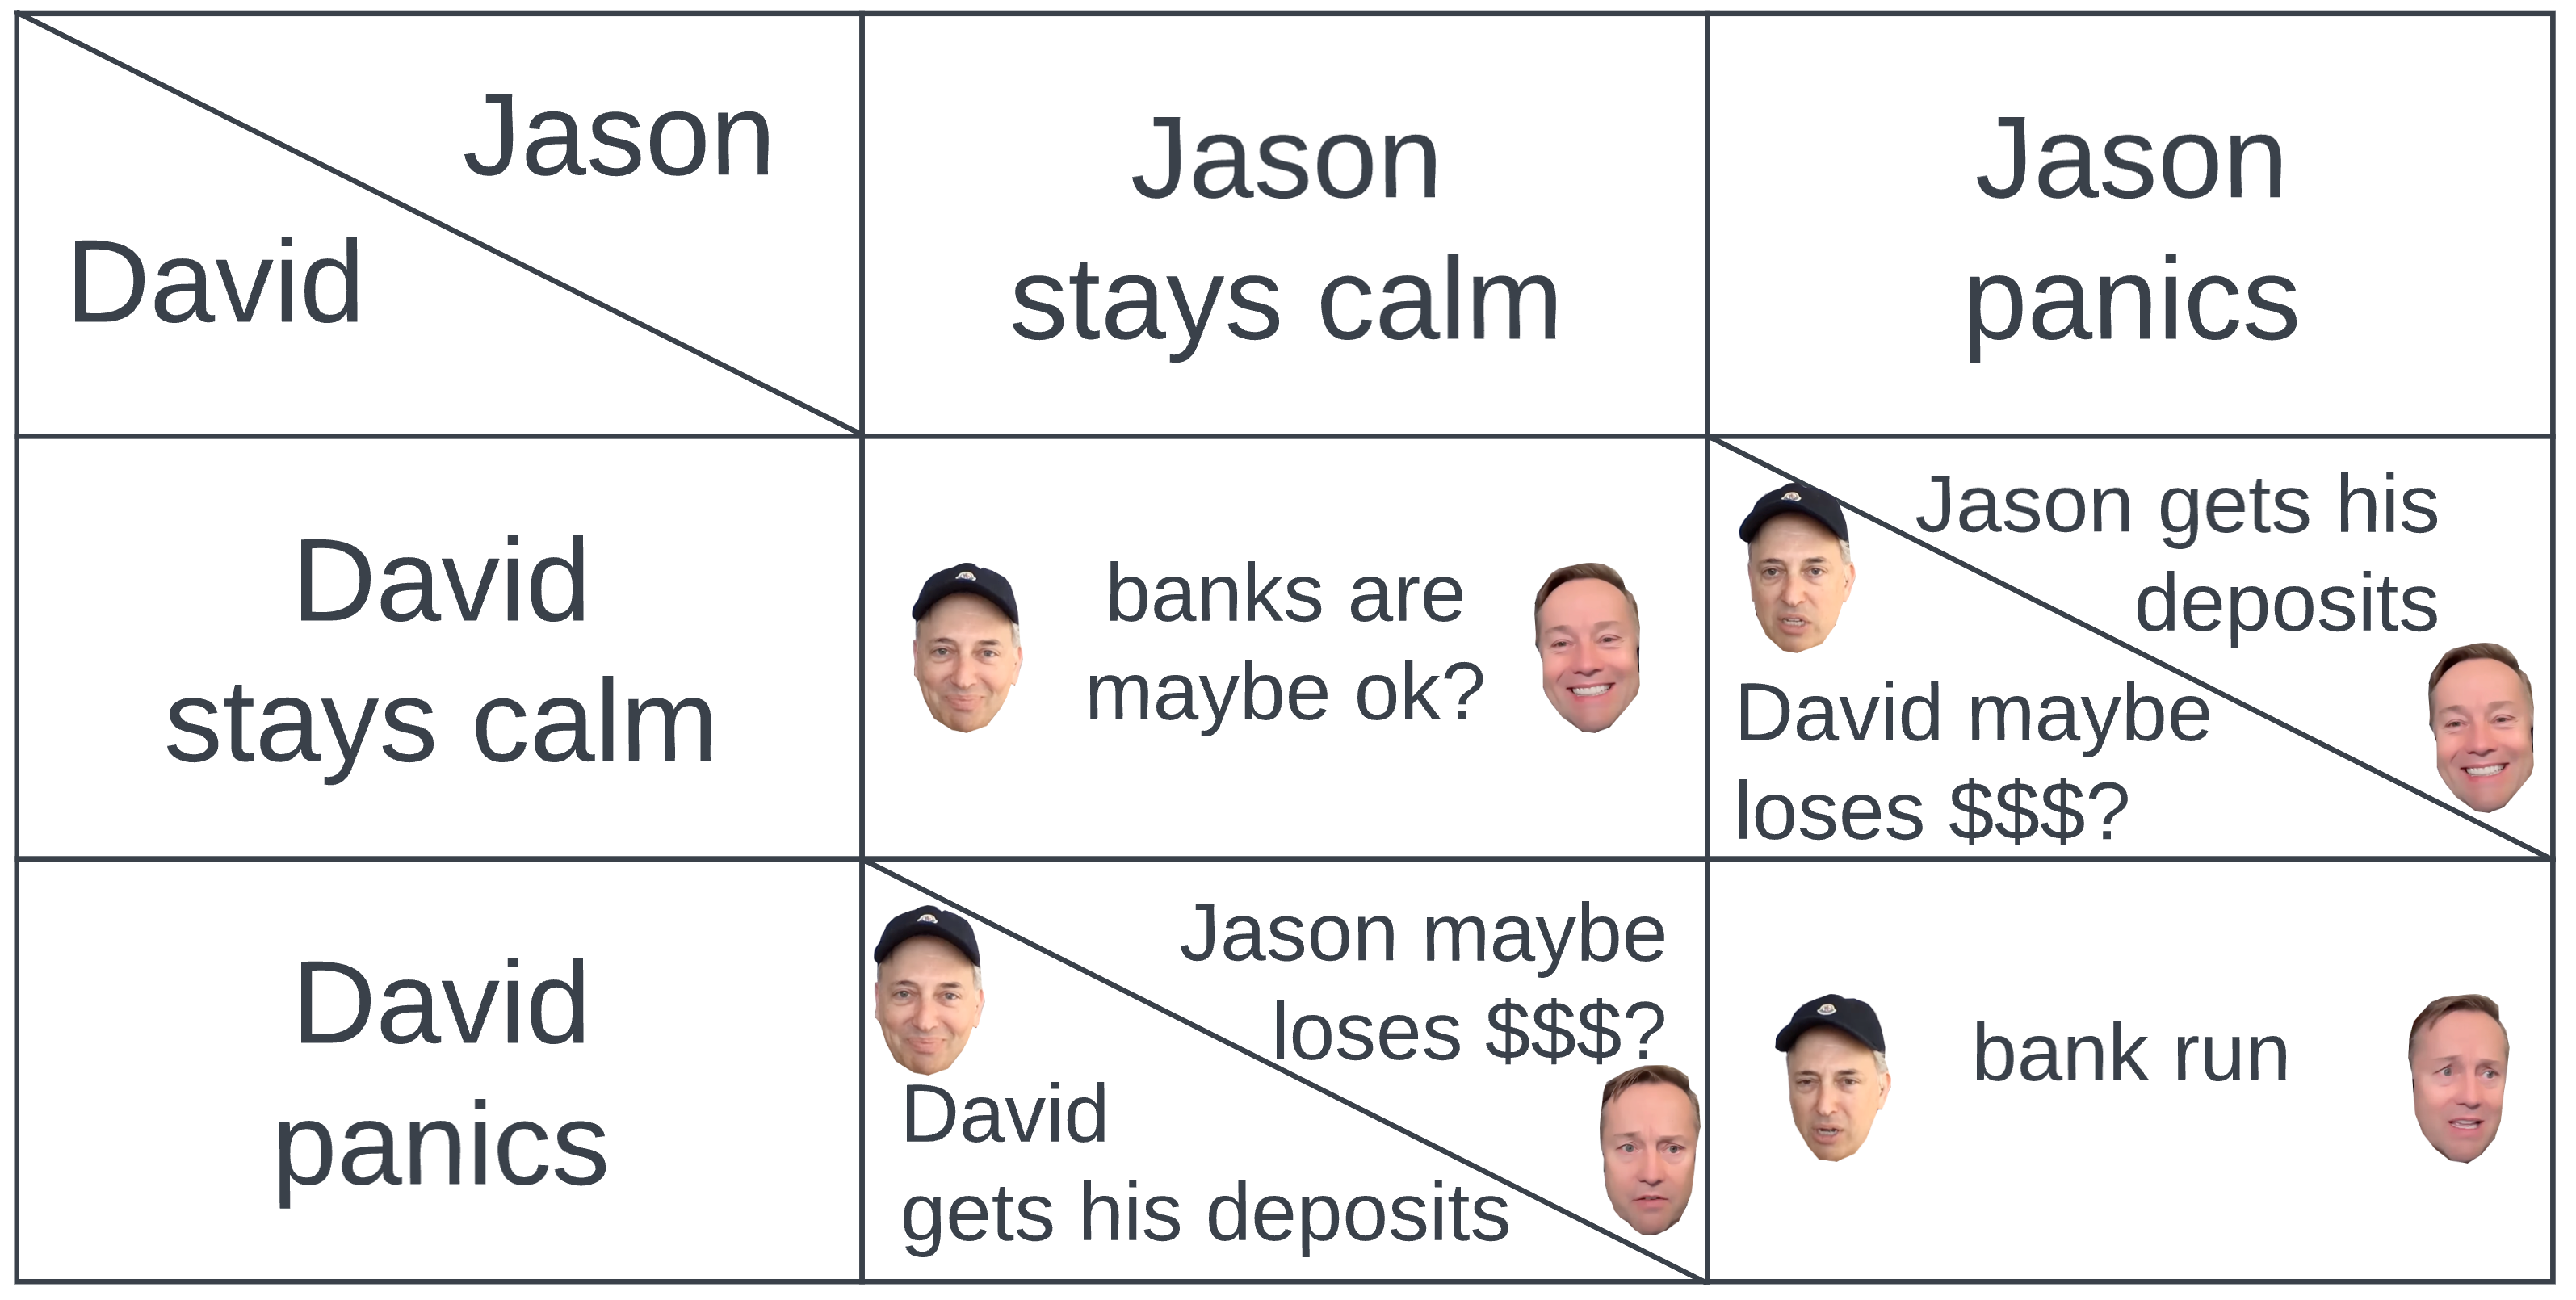 A chart, again depicting Jason's choices on the x-axis and David's on the y-axis, but now the choices are "stay calm" or "panic". If both stay calm, "banks are maybe ok?" If Jason stays calm and David panics, Jason gets his deposits and David might lose money; the same in reverse for the other scenario. If both panic, there's a bank run. Each cell is accompanied by pictures of David Sacks and Jason Calacanis either smiling or frowning depending on the outcome.